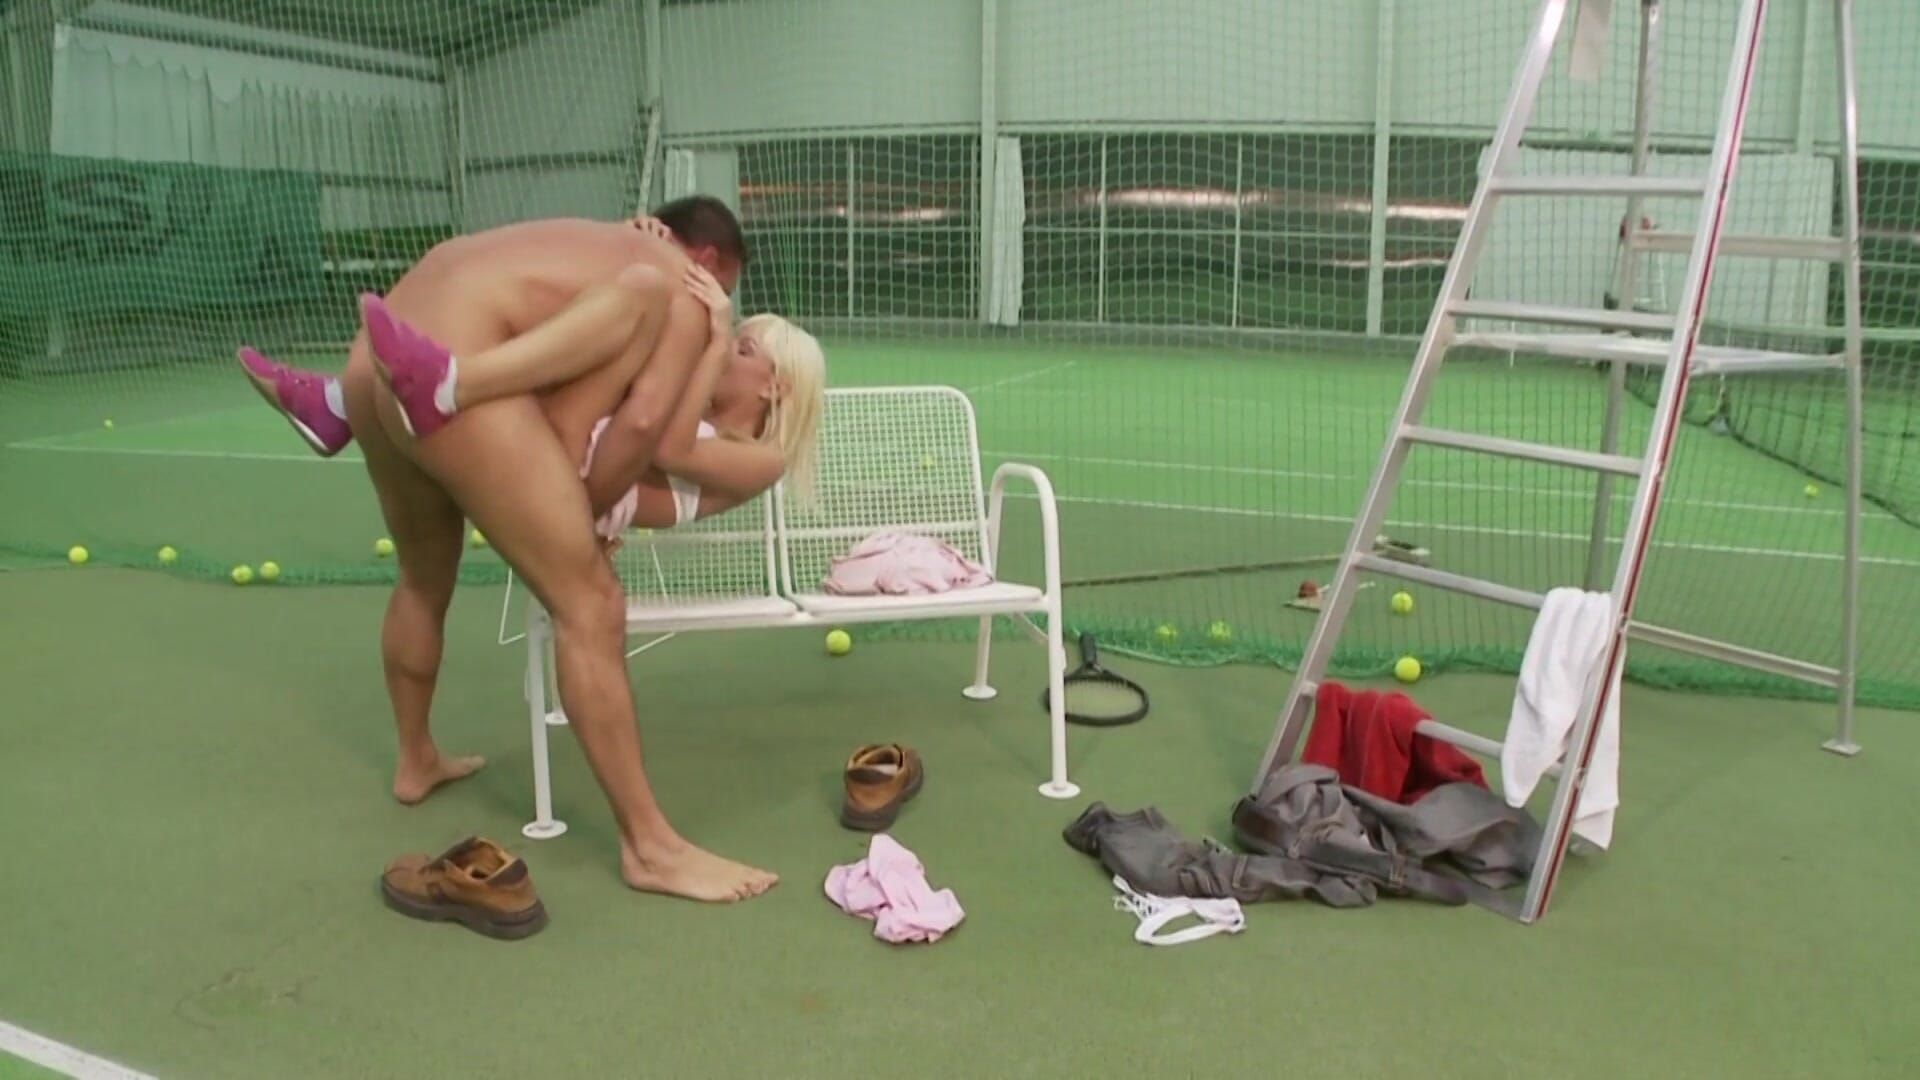 Amateur girls fuck in all holes: CUTE CHICKS. Pretty horny blonde getting her ass fucked on the tennis court by her coach –  – SEXUAL SIN